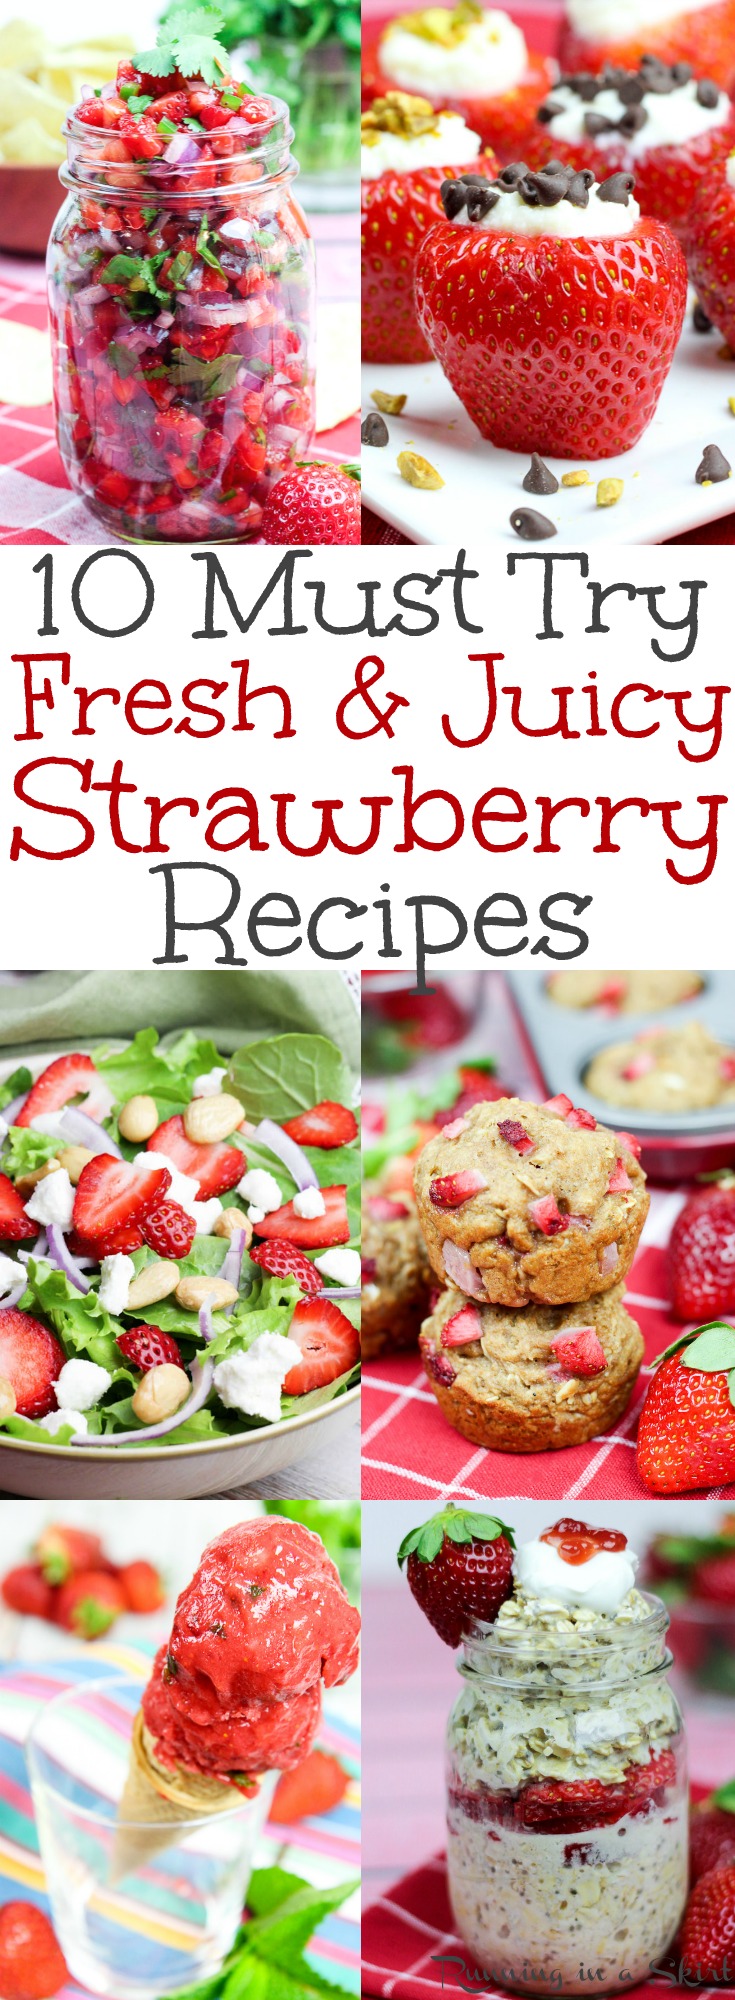 The Best Fresh & Juicy Strawberry Recipe - easy breakfast, dessert, snack, smoothie and salad ideas using berries!  These simple, clean eating homemade recipes will have you longing for summer.  Most recipes have no sugar.  Includes paleo, low carb, whole 30, gluten free, vegan & vegetarian options. / Running in a Skirt via @juliewunder